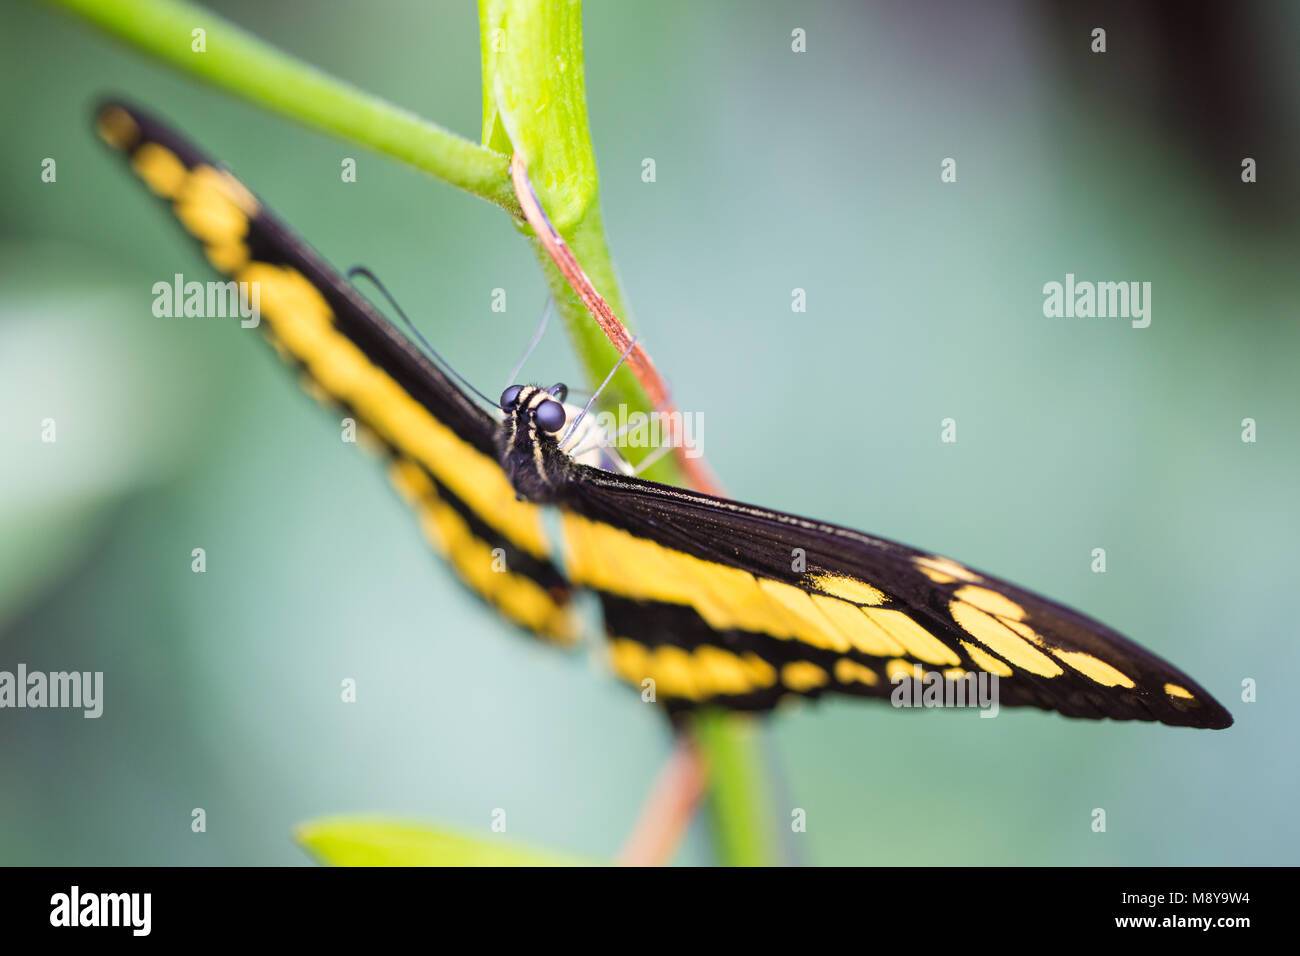 King swallowtail butterfly perched on a plant Stock Photo